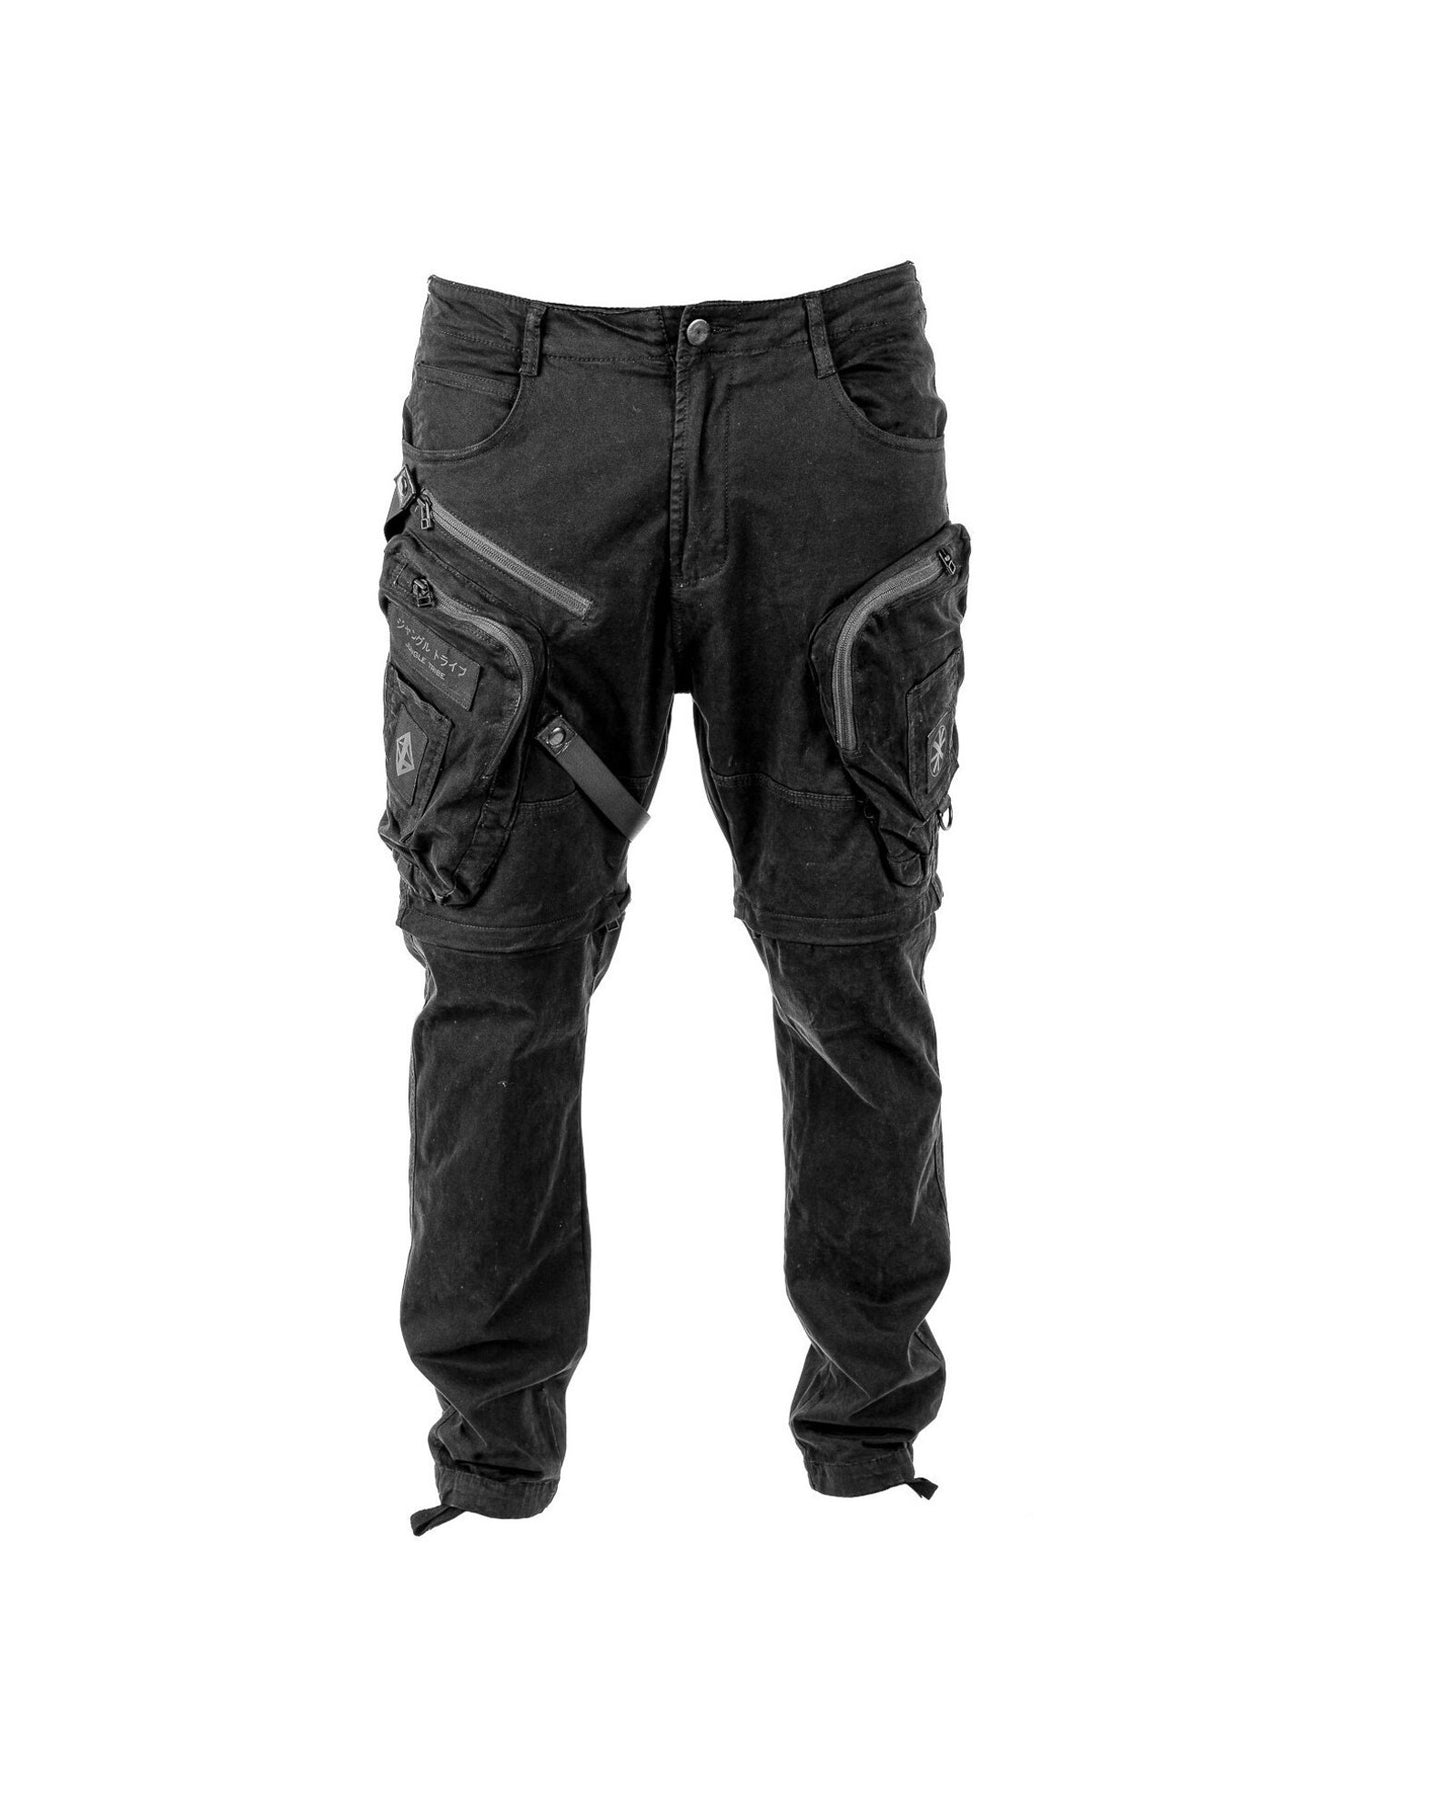 Tech 13 Cargo Pants and Zip Off Shorts